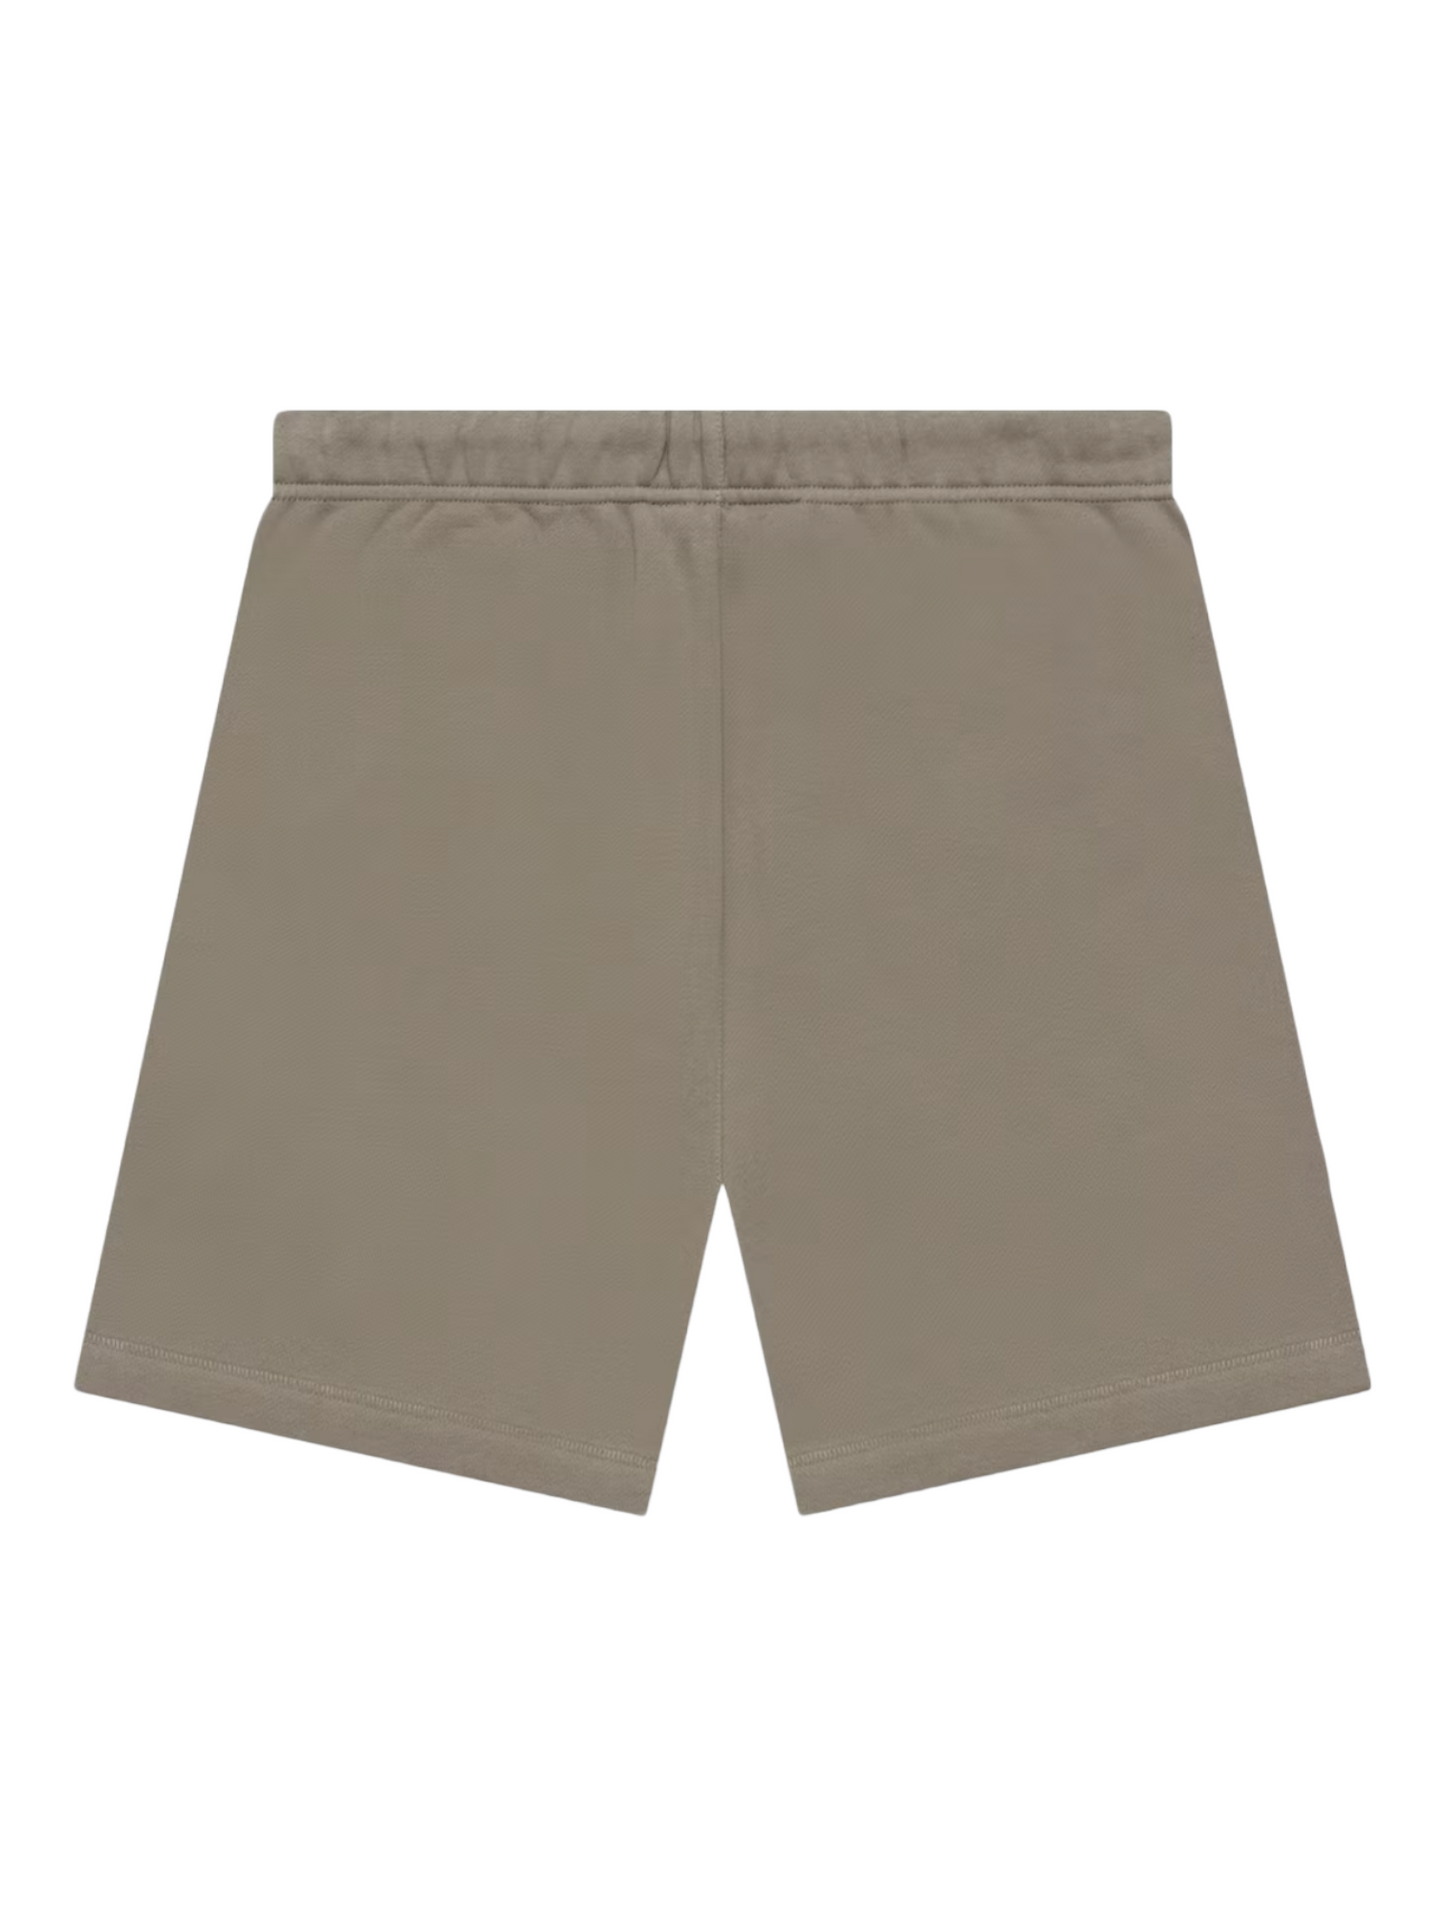 Essentials Fear of God Shorts Desert Taupe SS22 - Genuine Design Luxury Consignment Calgary, Canada New & Pre-Owned Authentic Clothing, Shoes, Accessories.